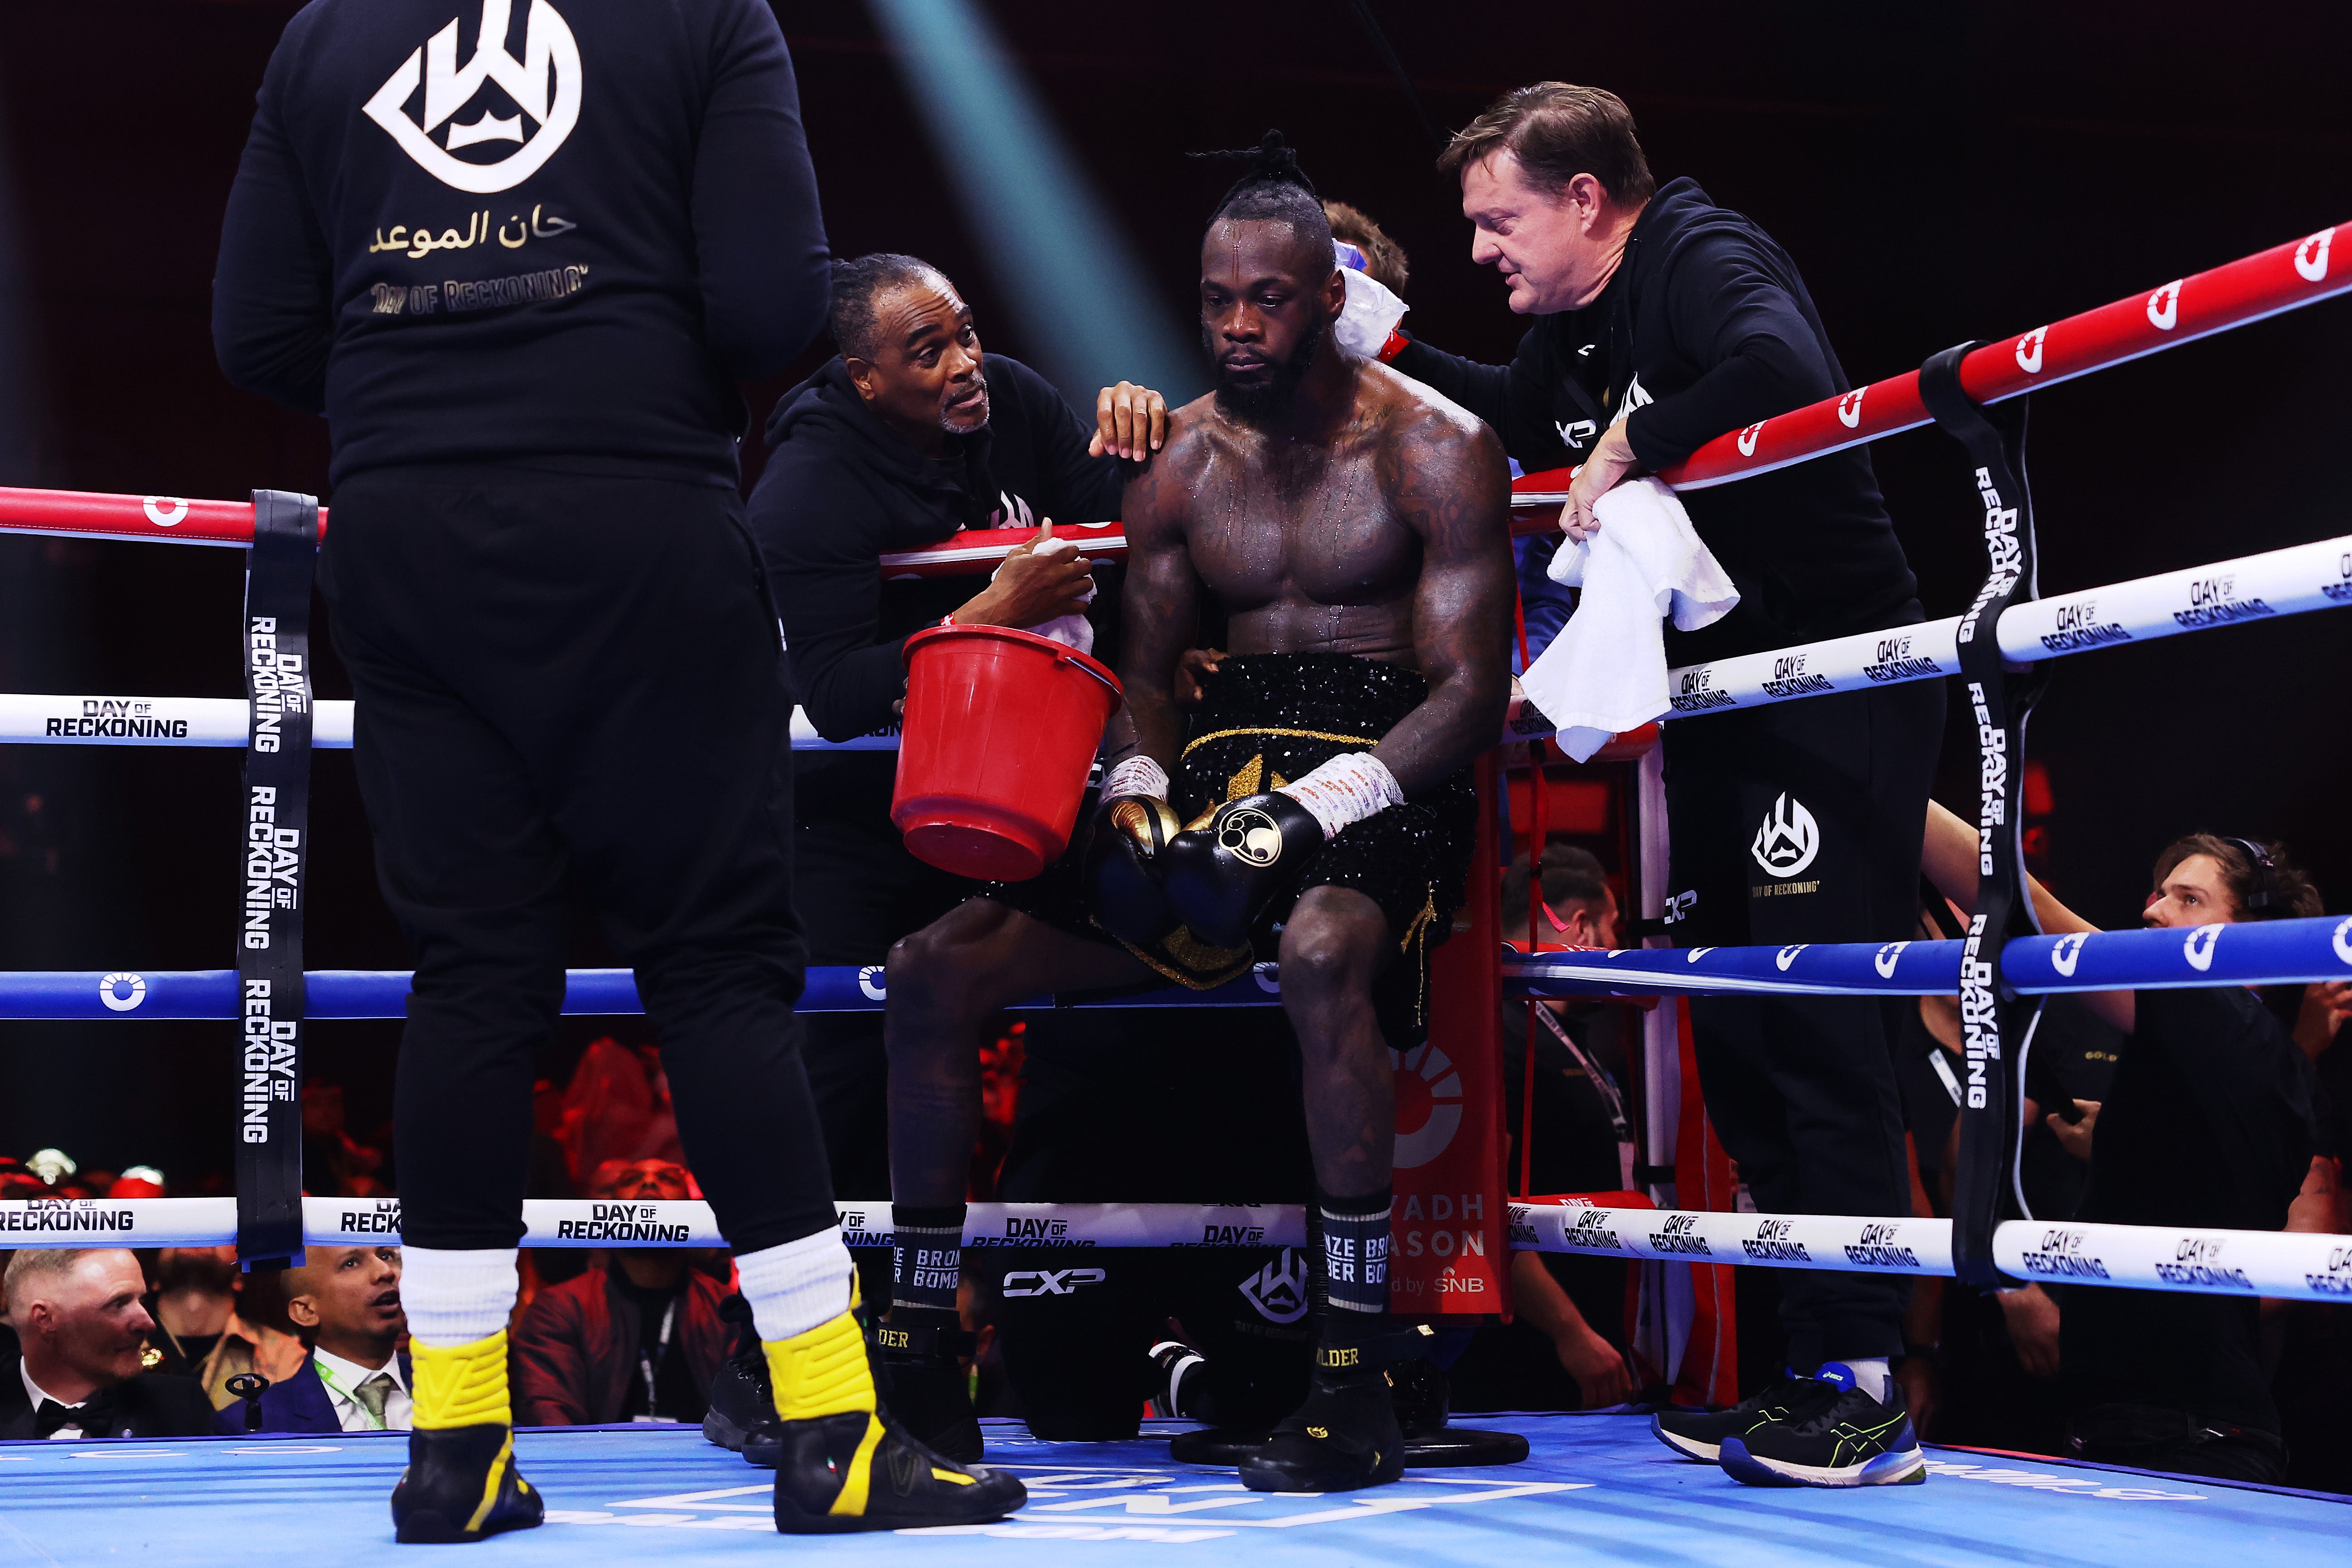 Deontay Wilder suffered a one-sided loss to Joseph Parker in Riyadh